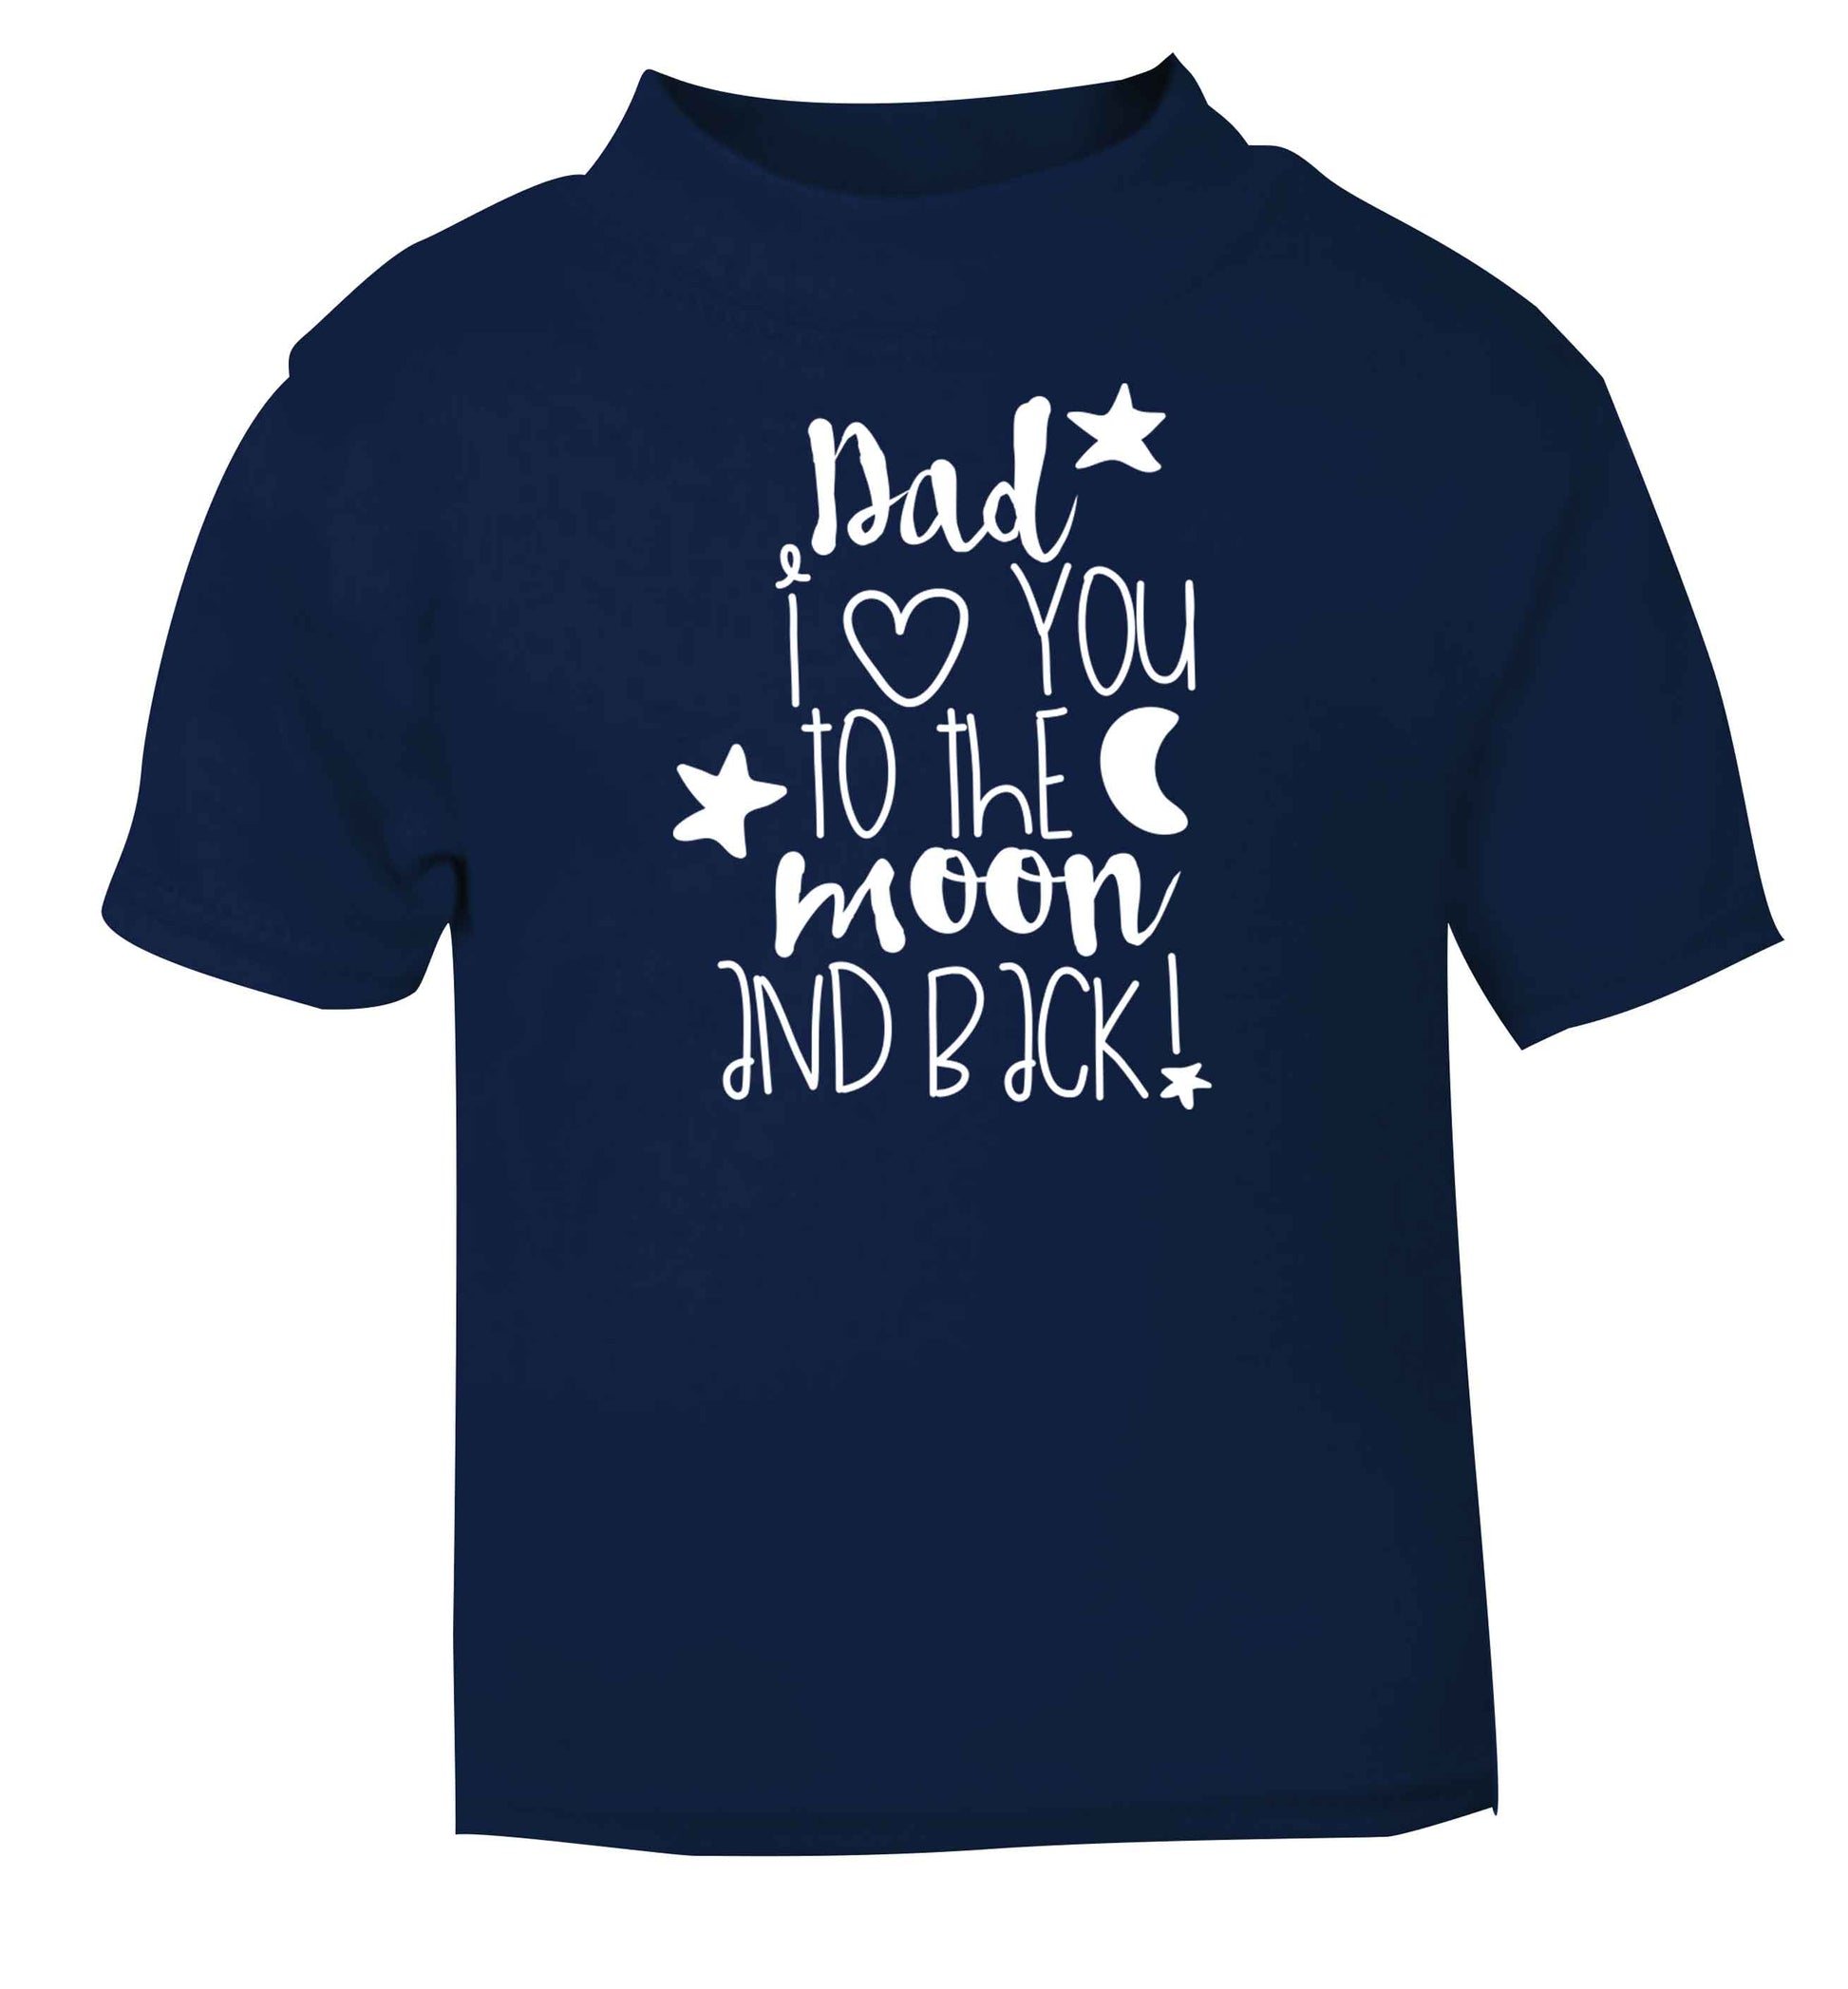 Dad I love you to the moon and back navy baby toddler Tshirt 2 Years